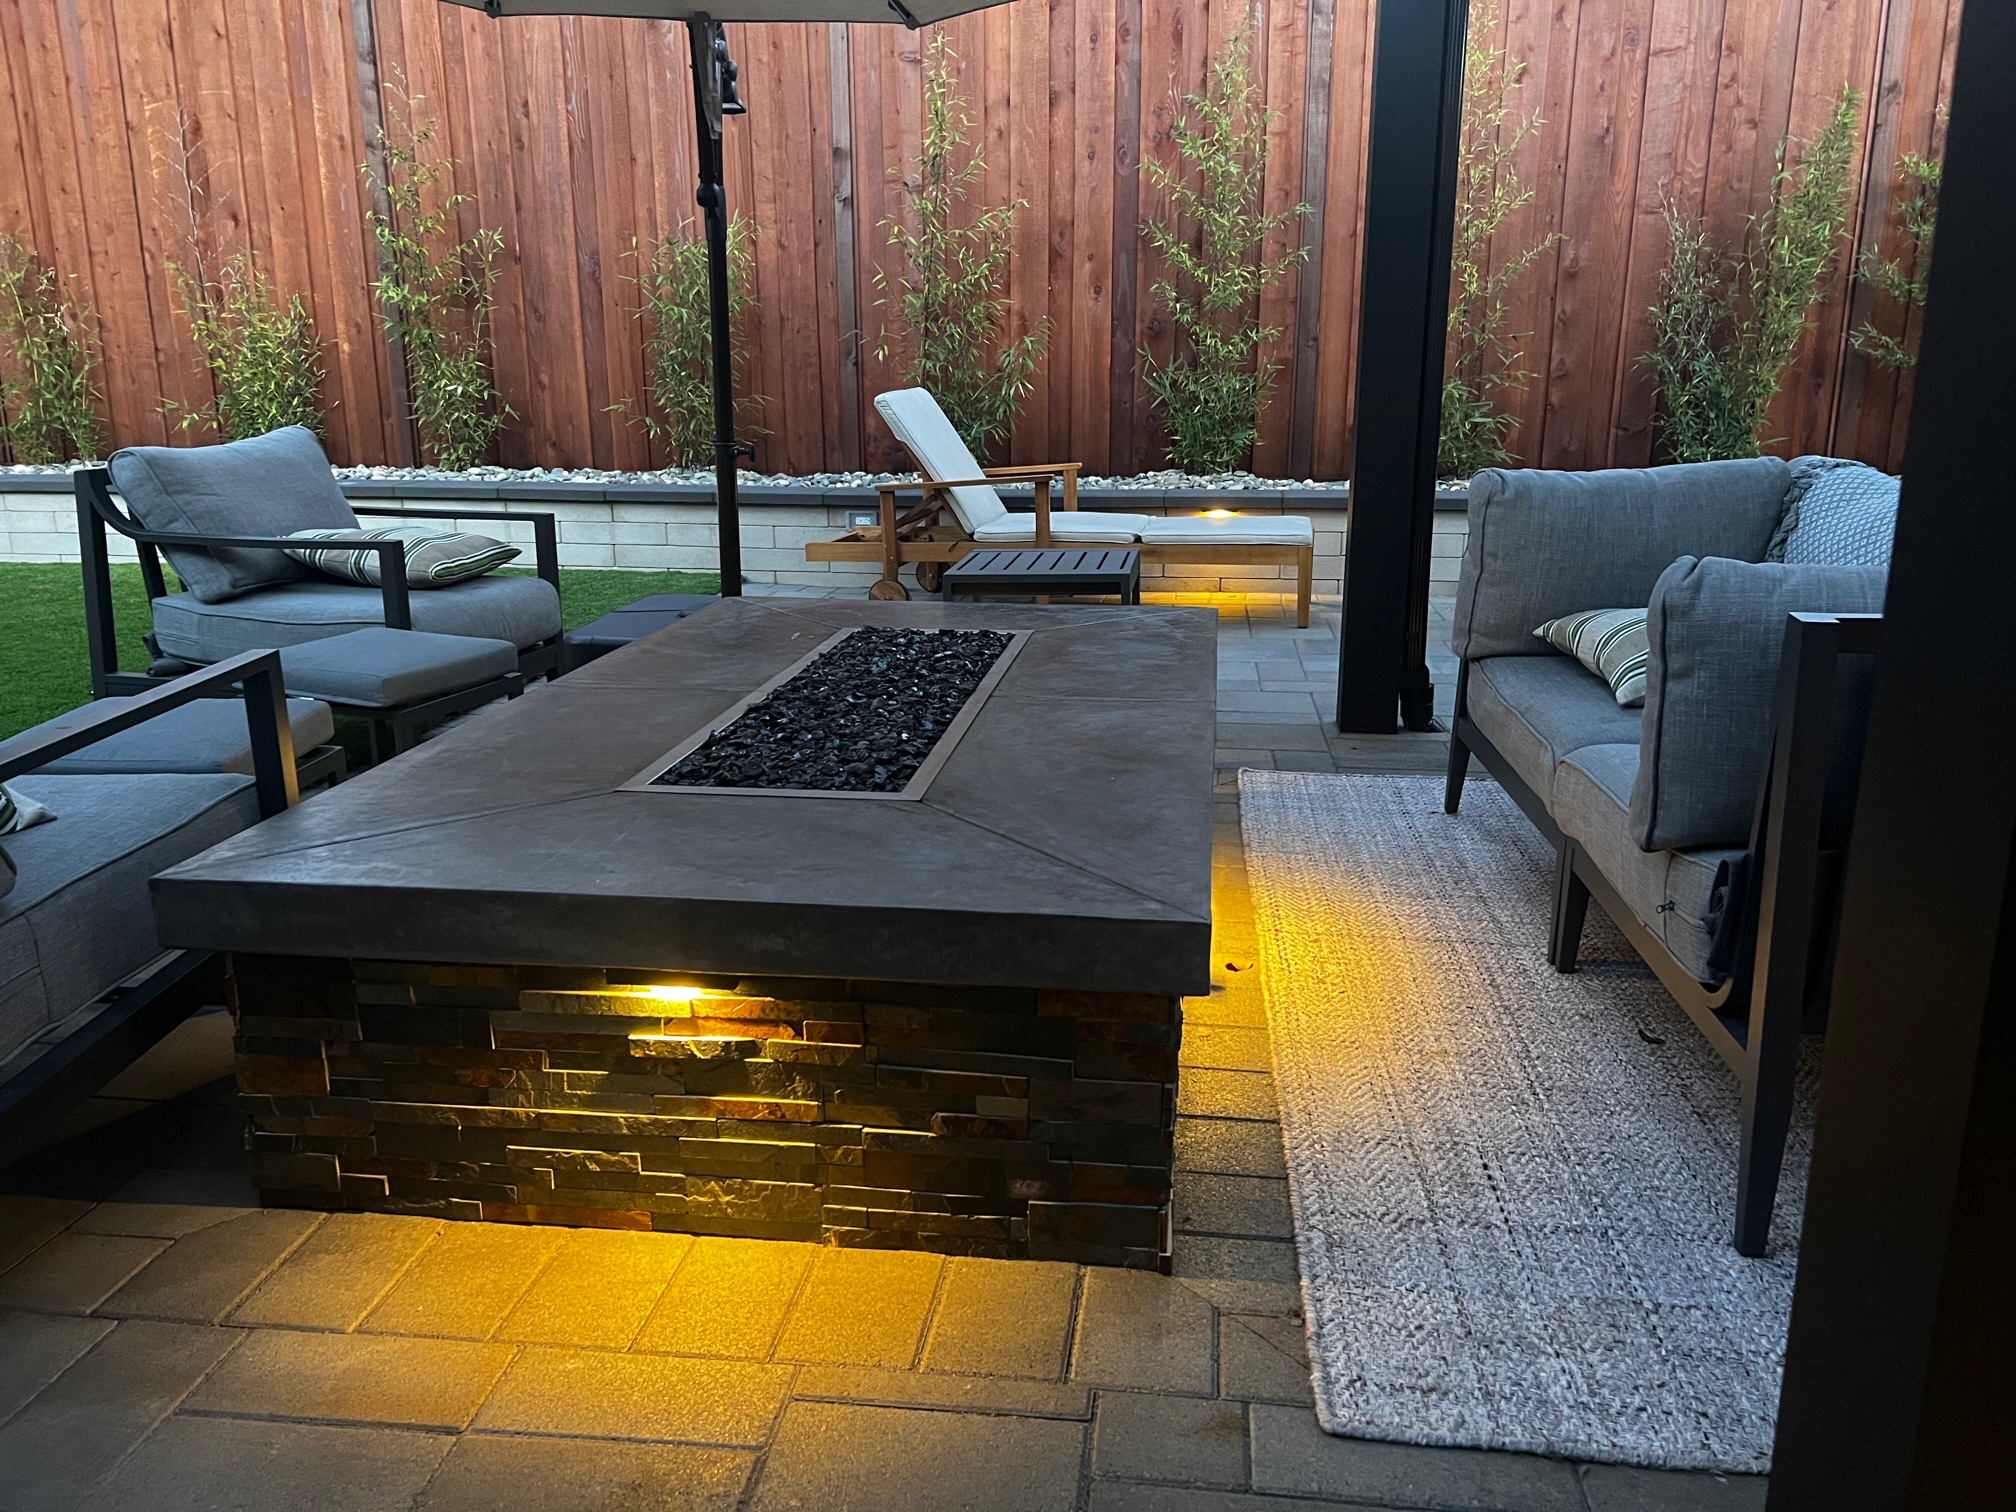 Concord Project – Fire pit